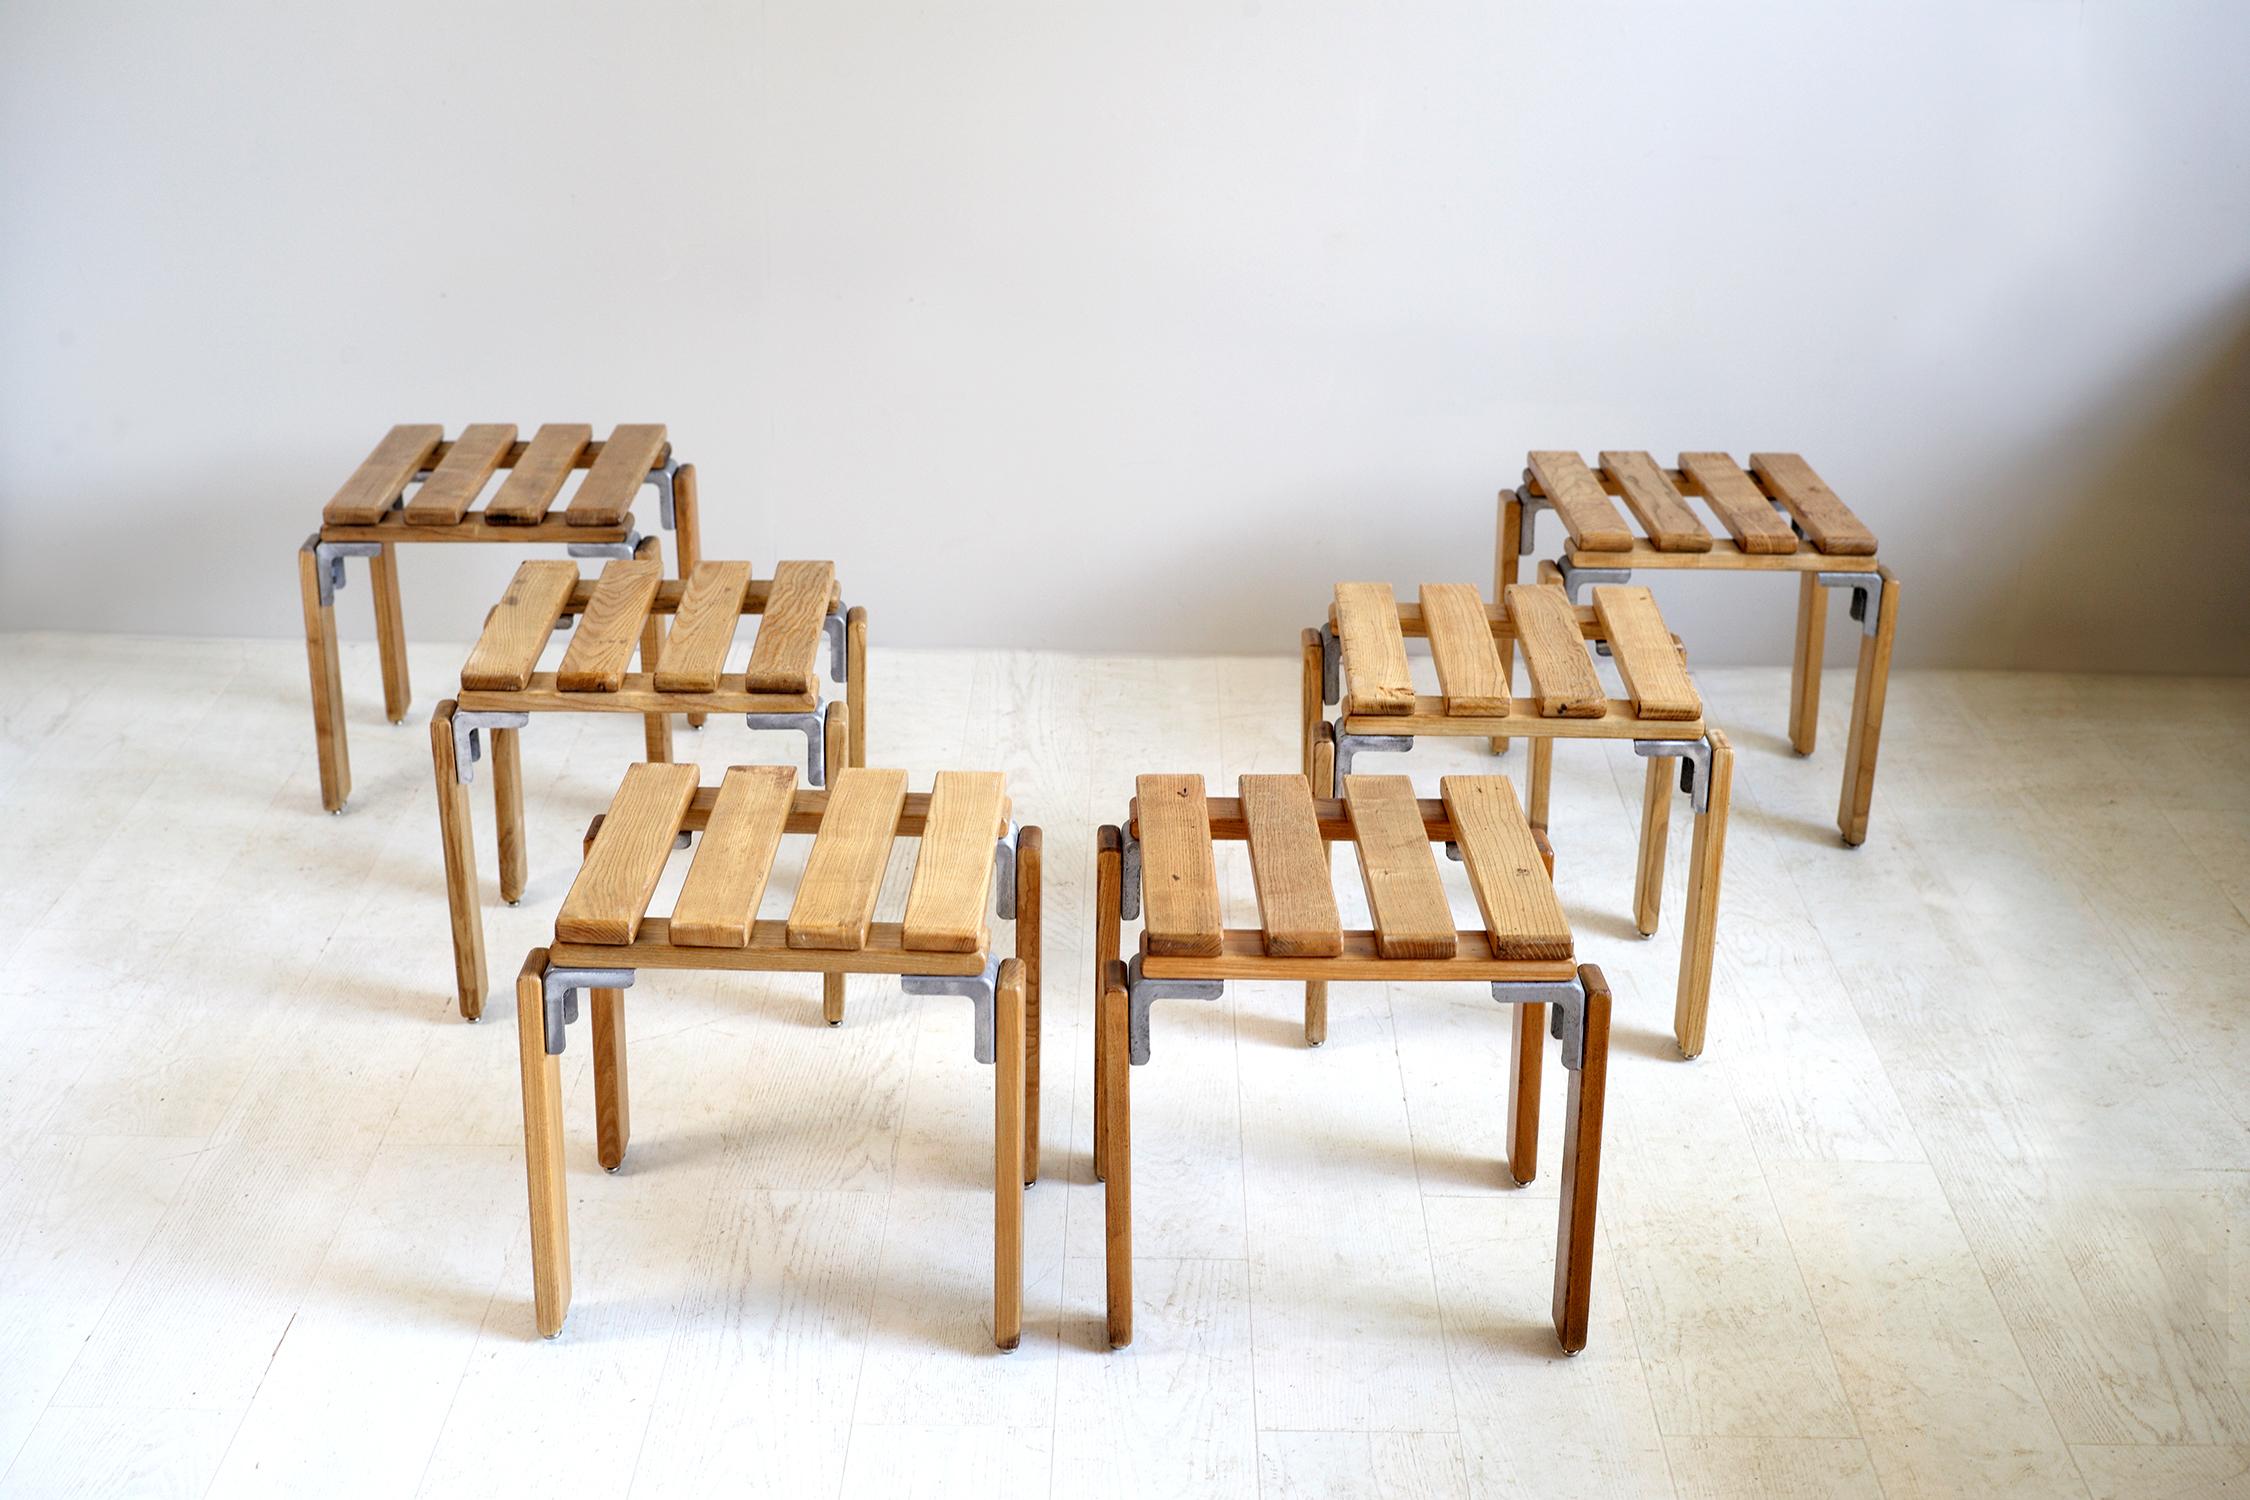 Minimalist Georges Candilis and Anja Blomstedt, Set of 6 Stools, France, 1969